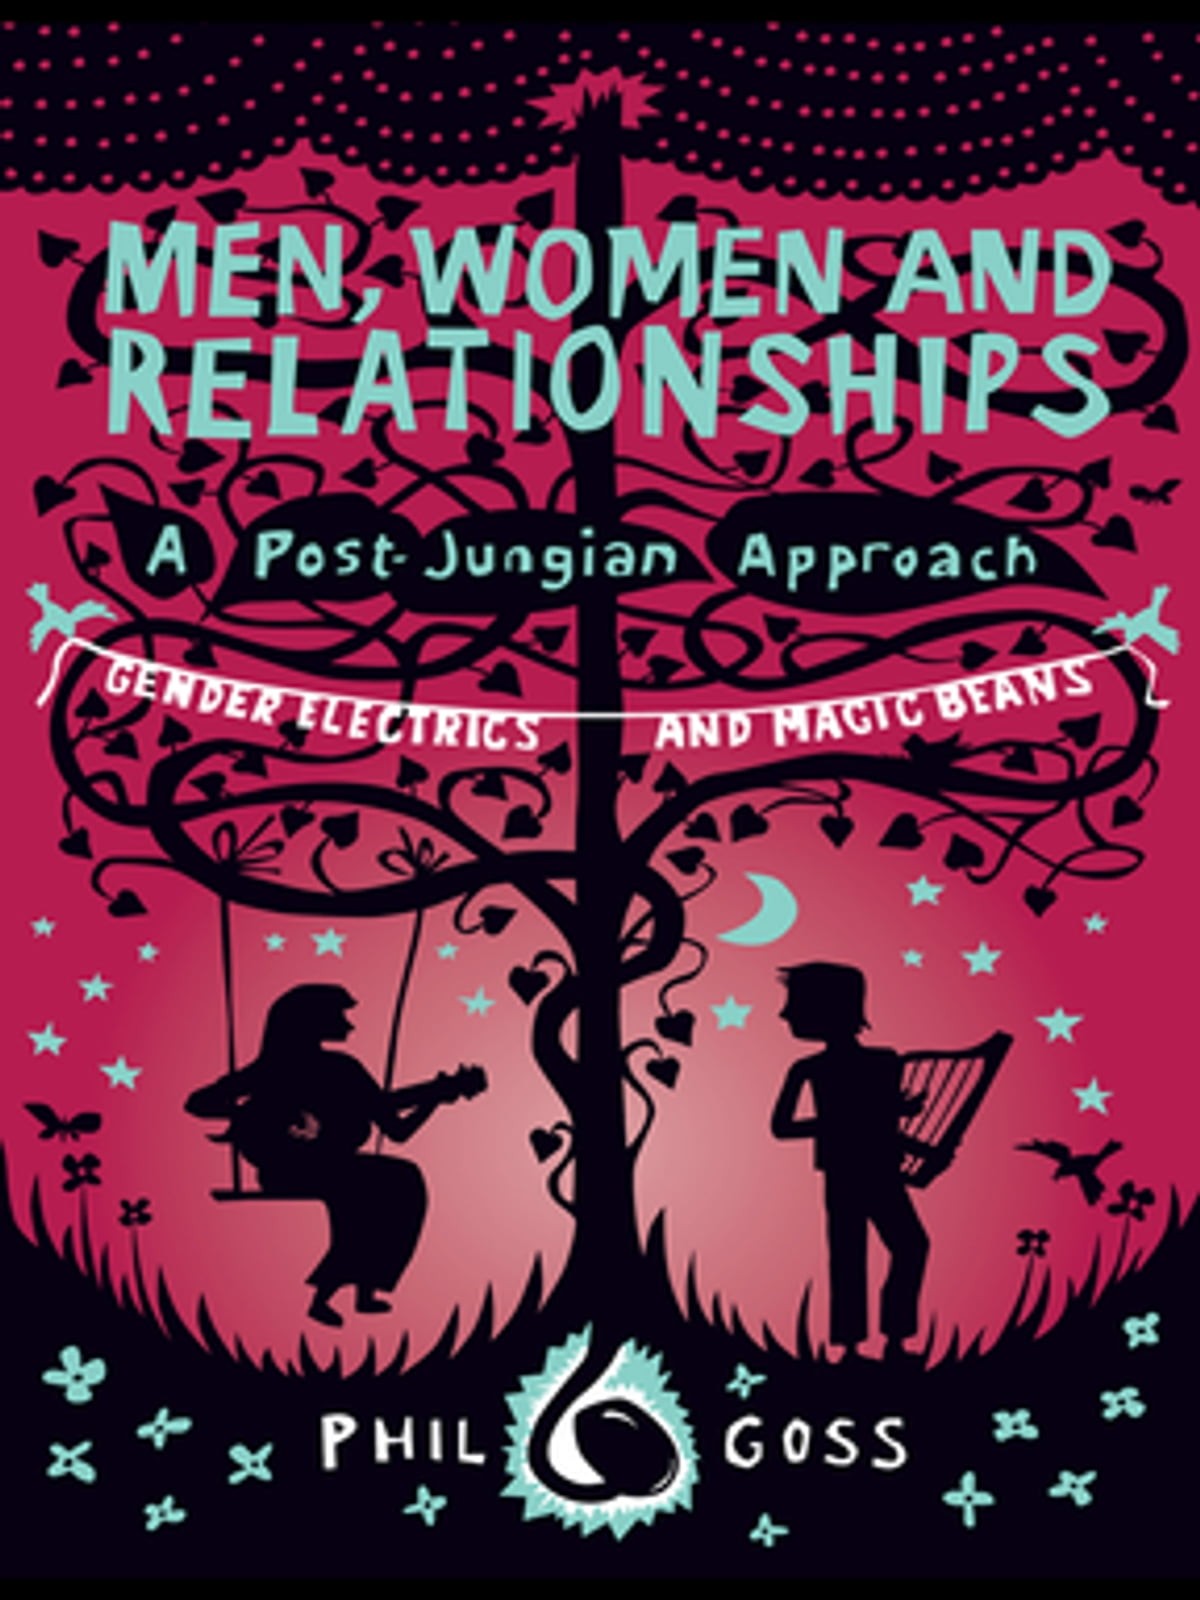 Men, Women and Relationships – a Post-Jungian Approach: Gender Electrics and Magic Beans